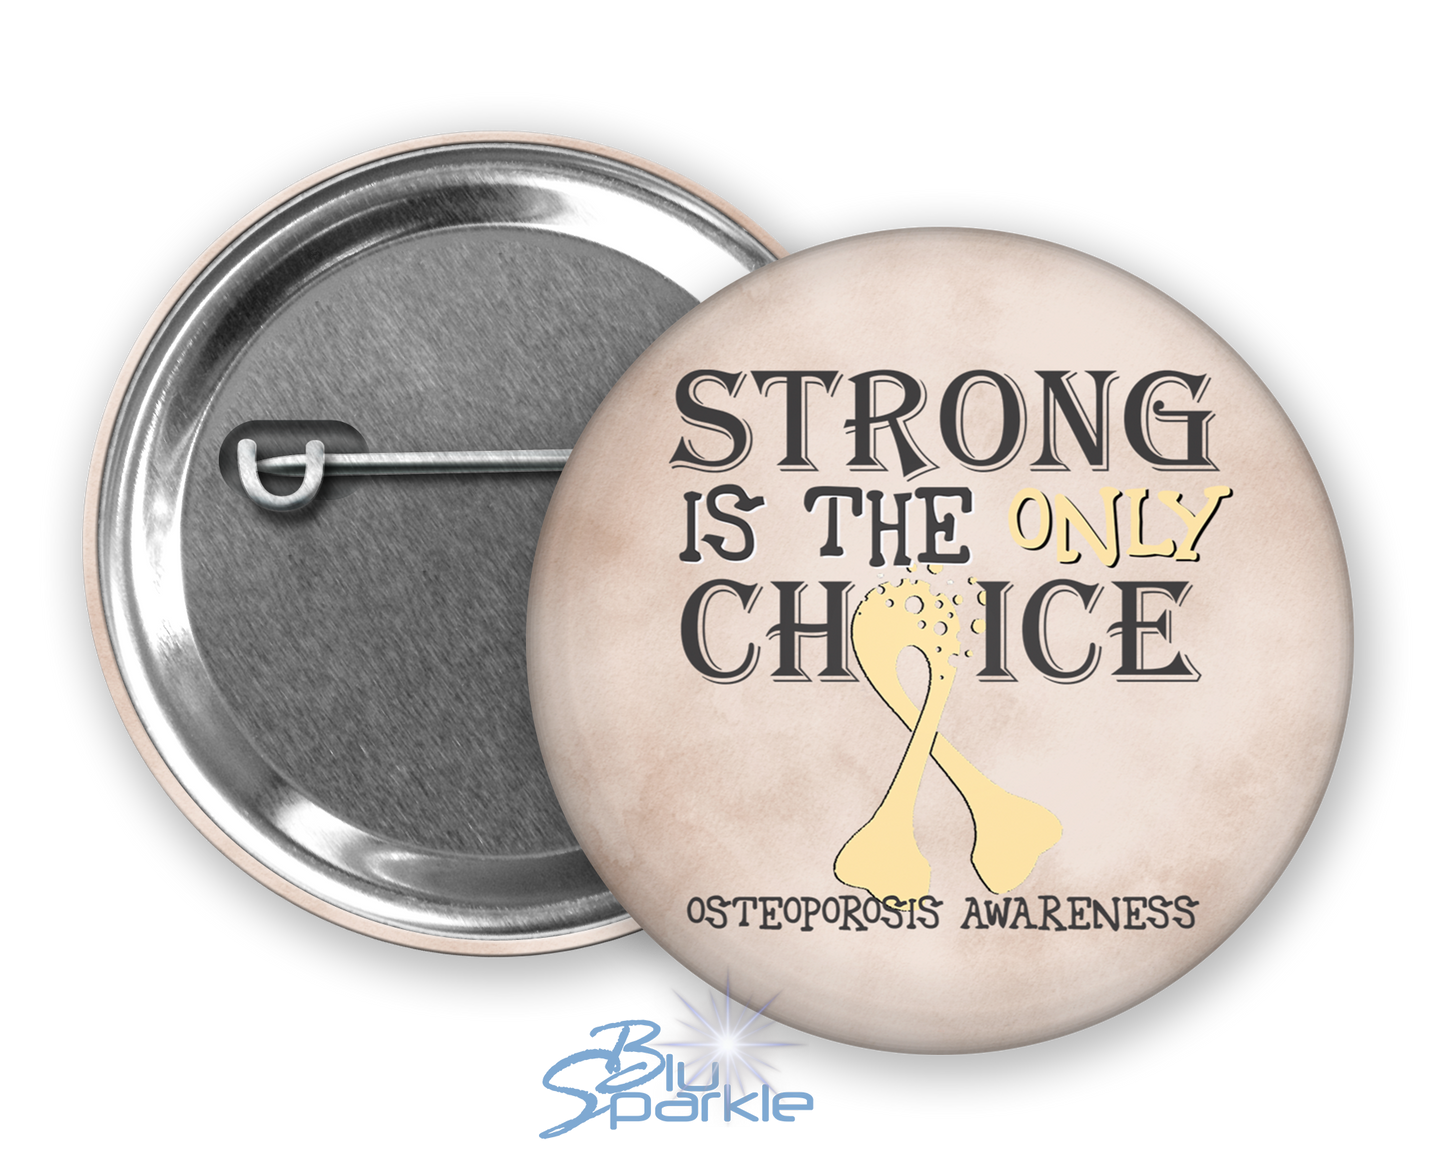 Strong is the Only Choice -Osteoporosis Awareness Pinback Button